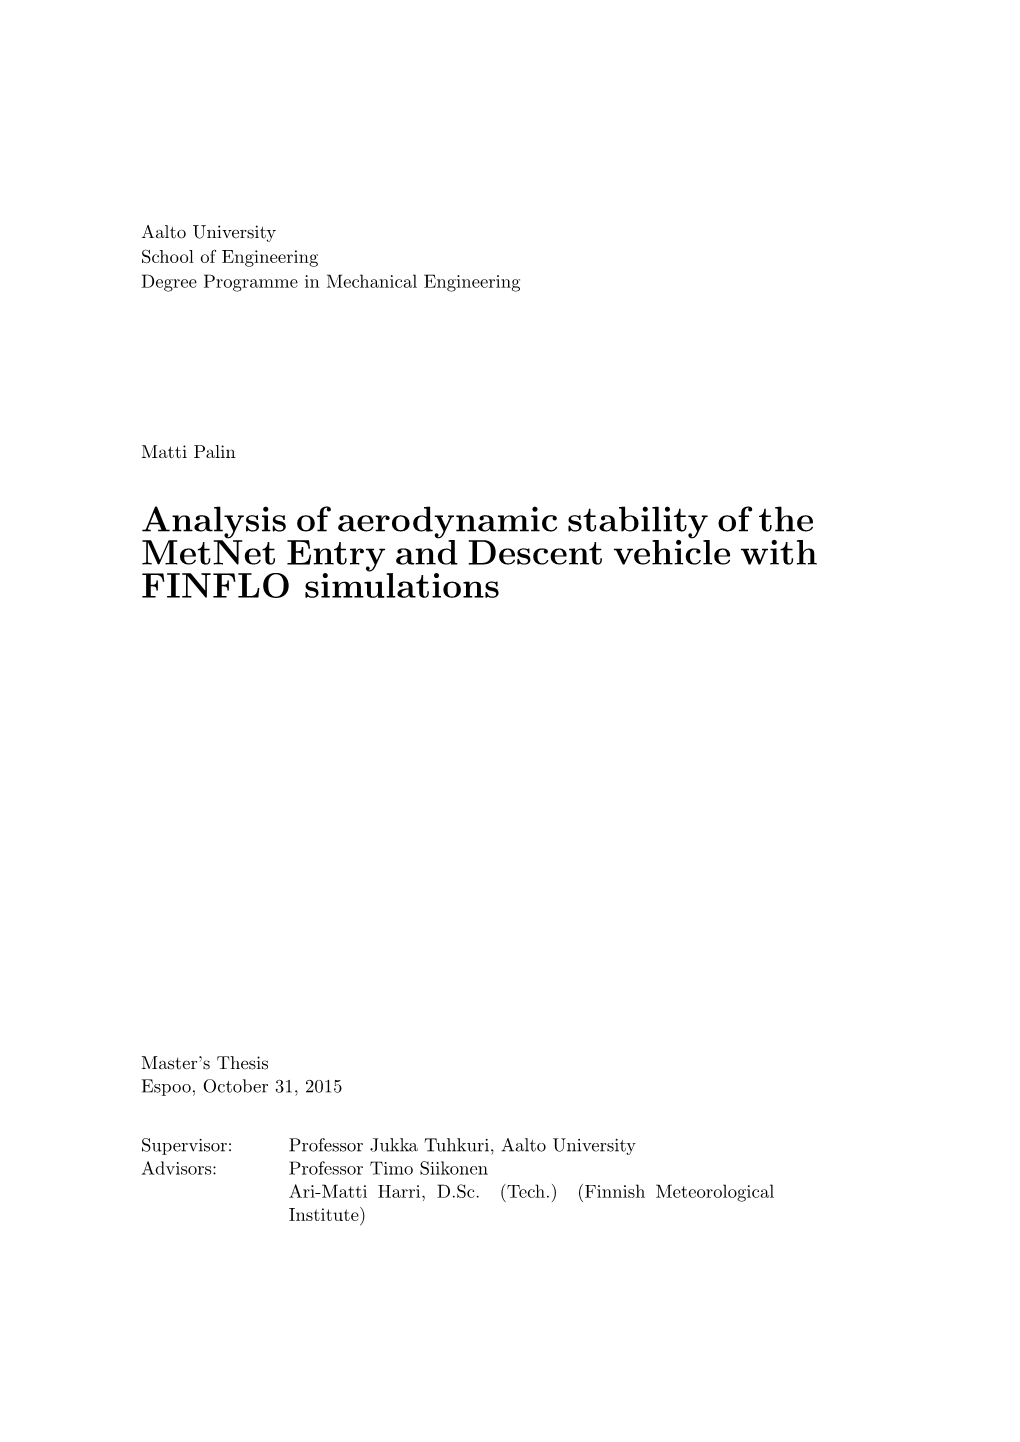 Analysis of Aerodynamic Stability of the Metnet Entry and Descent Vehicle with FINFLO Simulations